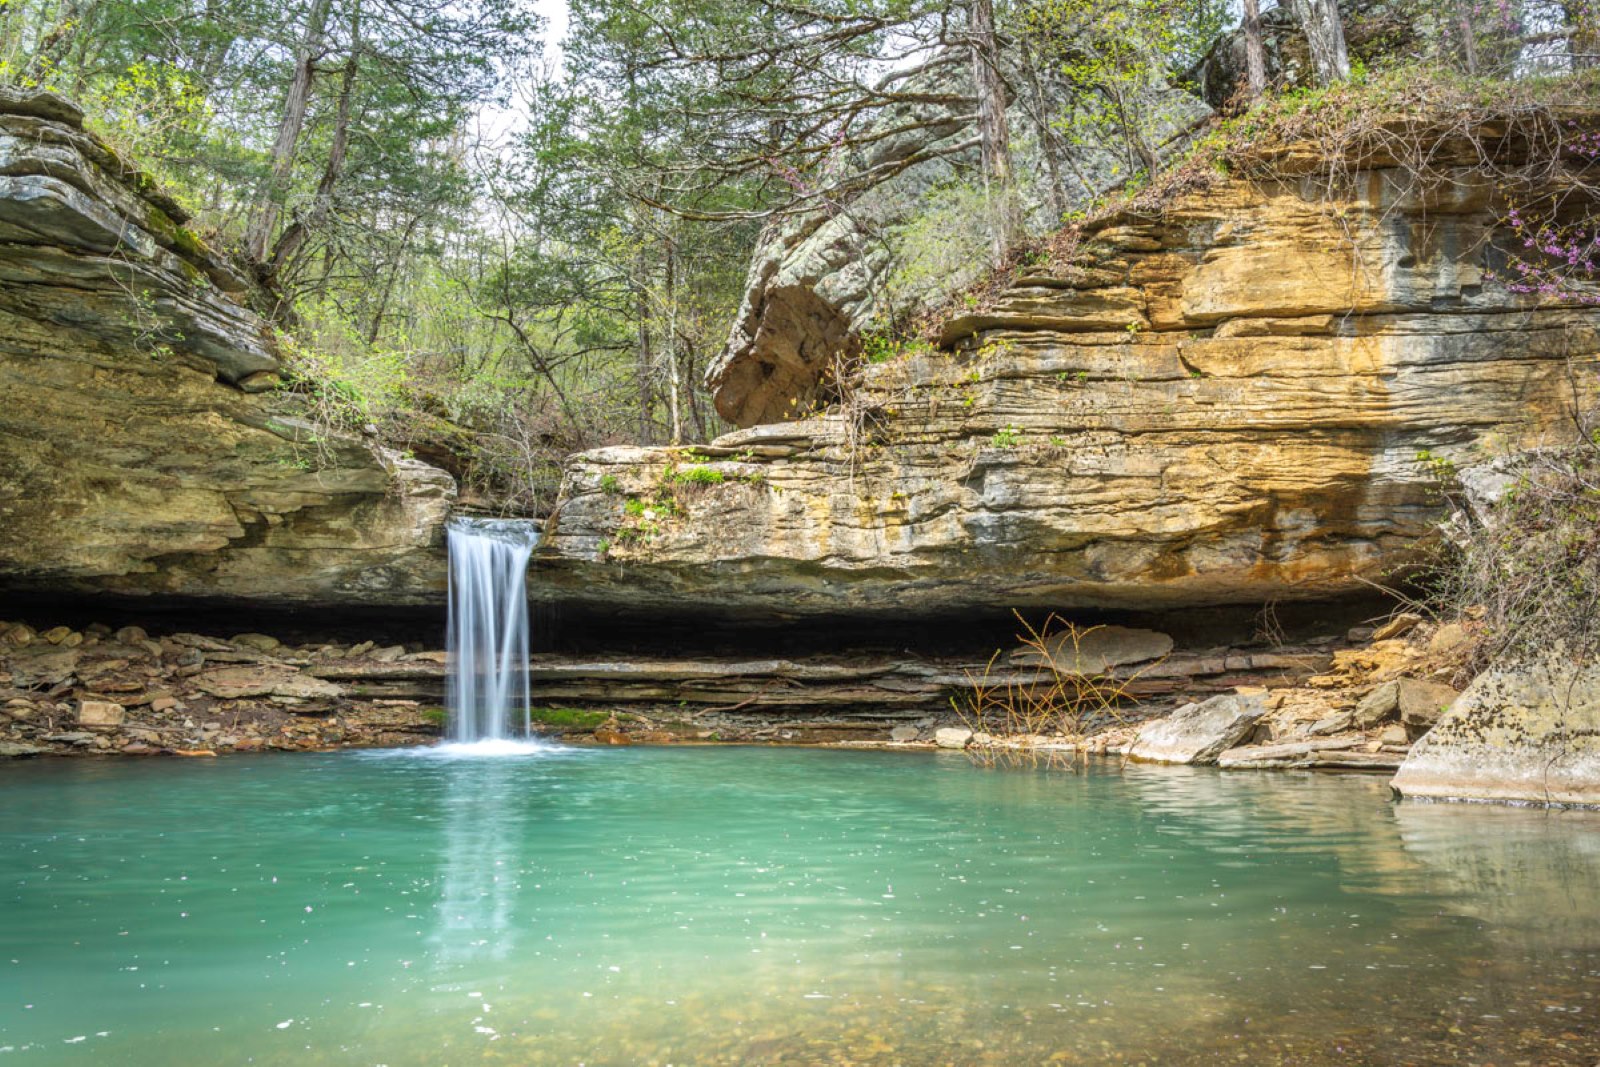 Hiking Guide: Short hike with big reward leads to Paige and Broadwater Hollow Falls